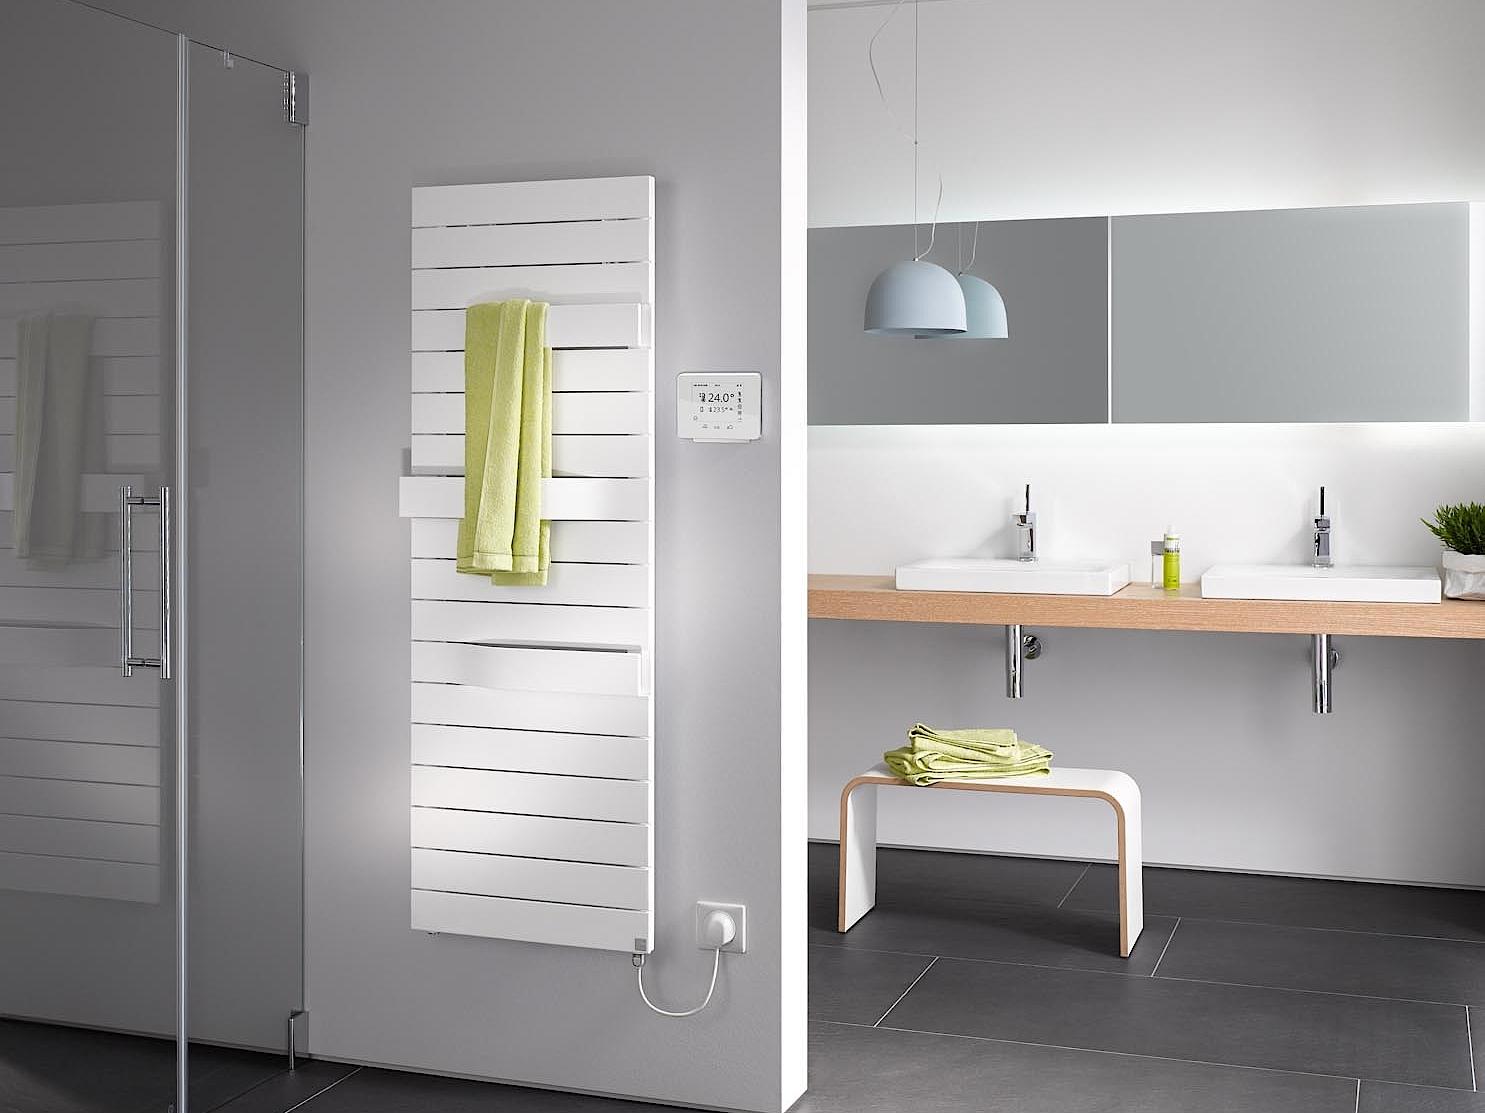 Kermi Tabeo-E design and bathroom radiators also available in an electric version.